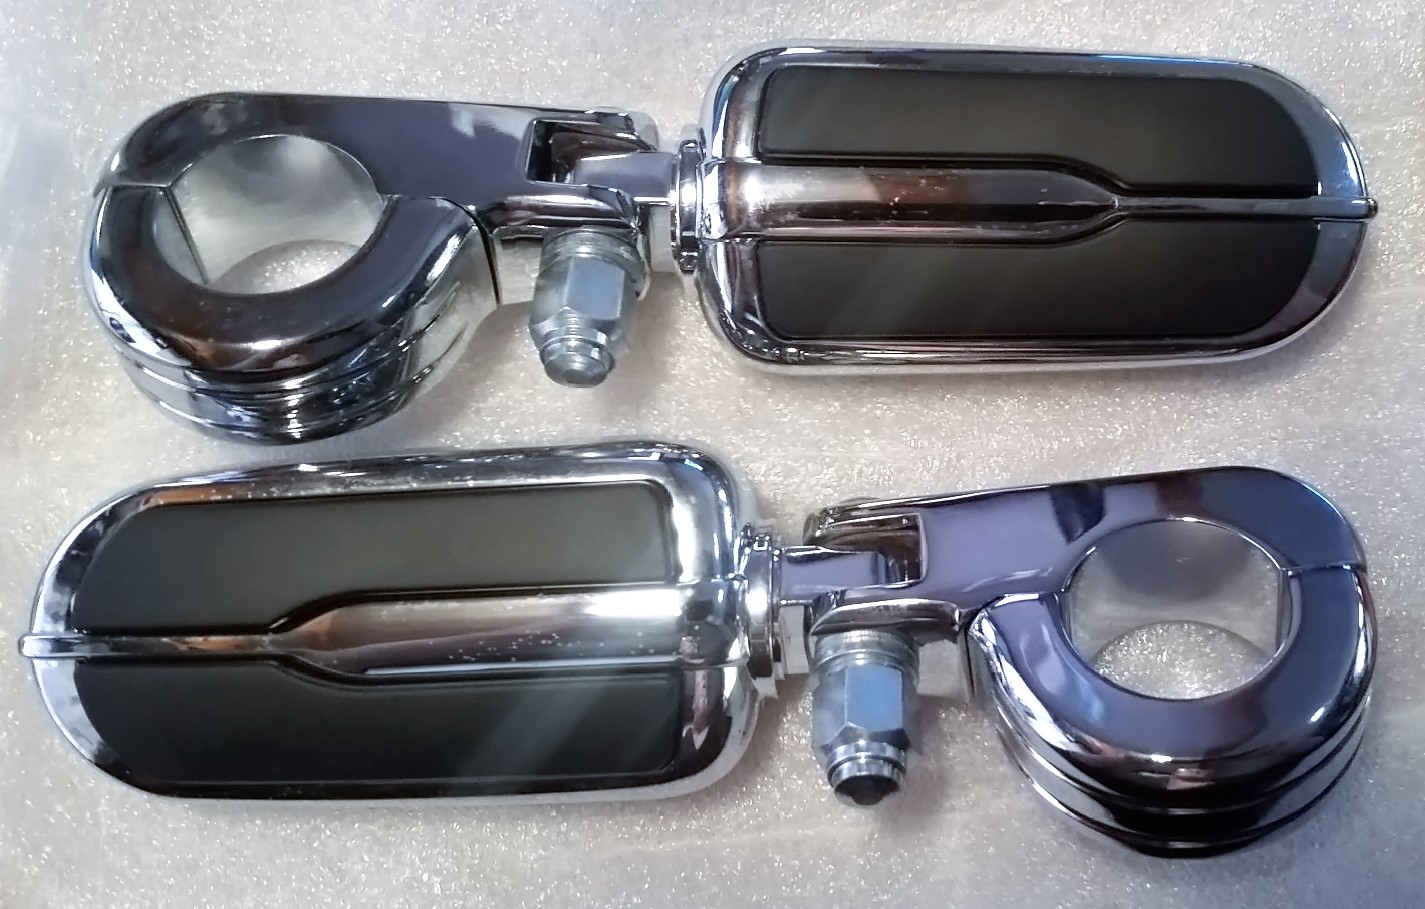 Nearly New Rumble Collection Highway pegs with Billet mounts - Harley ...